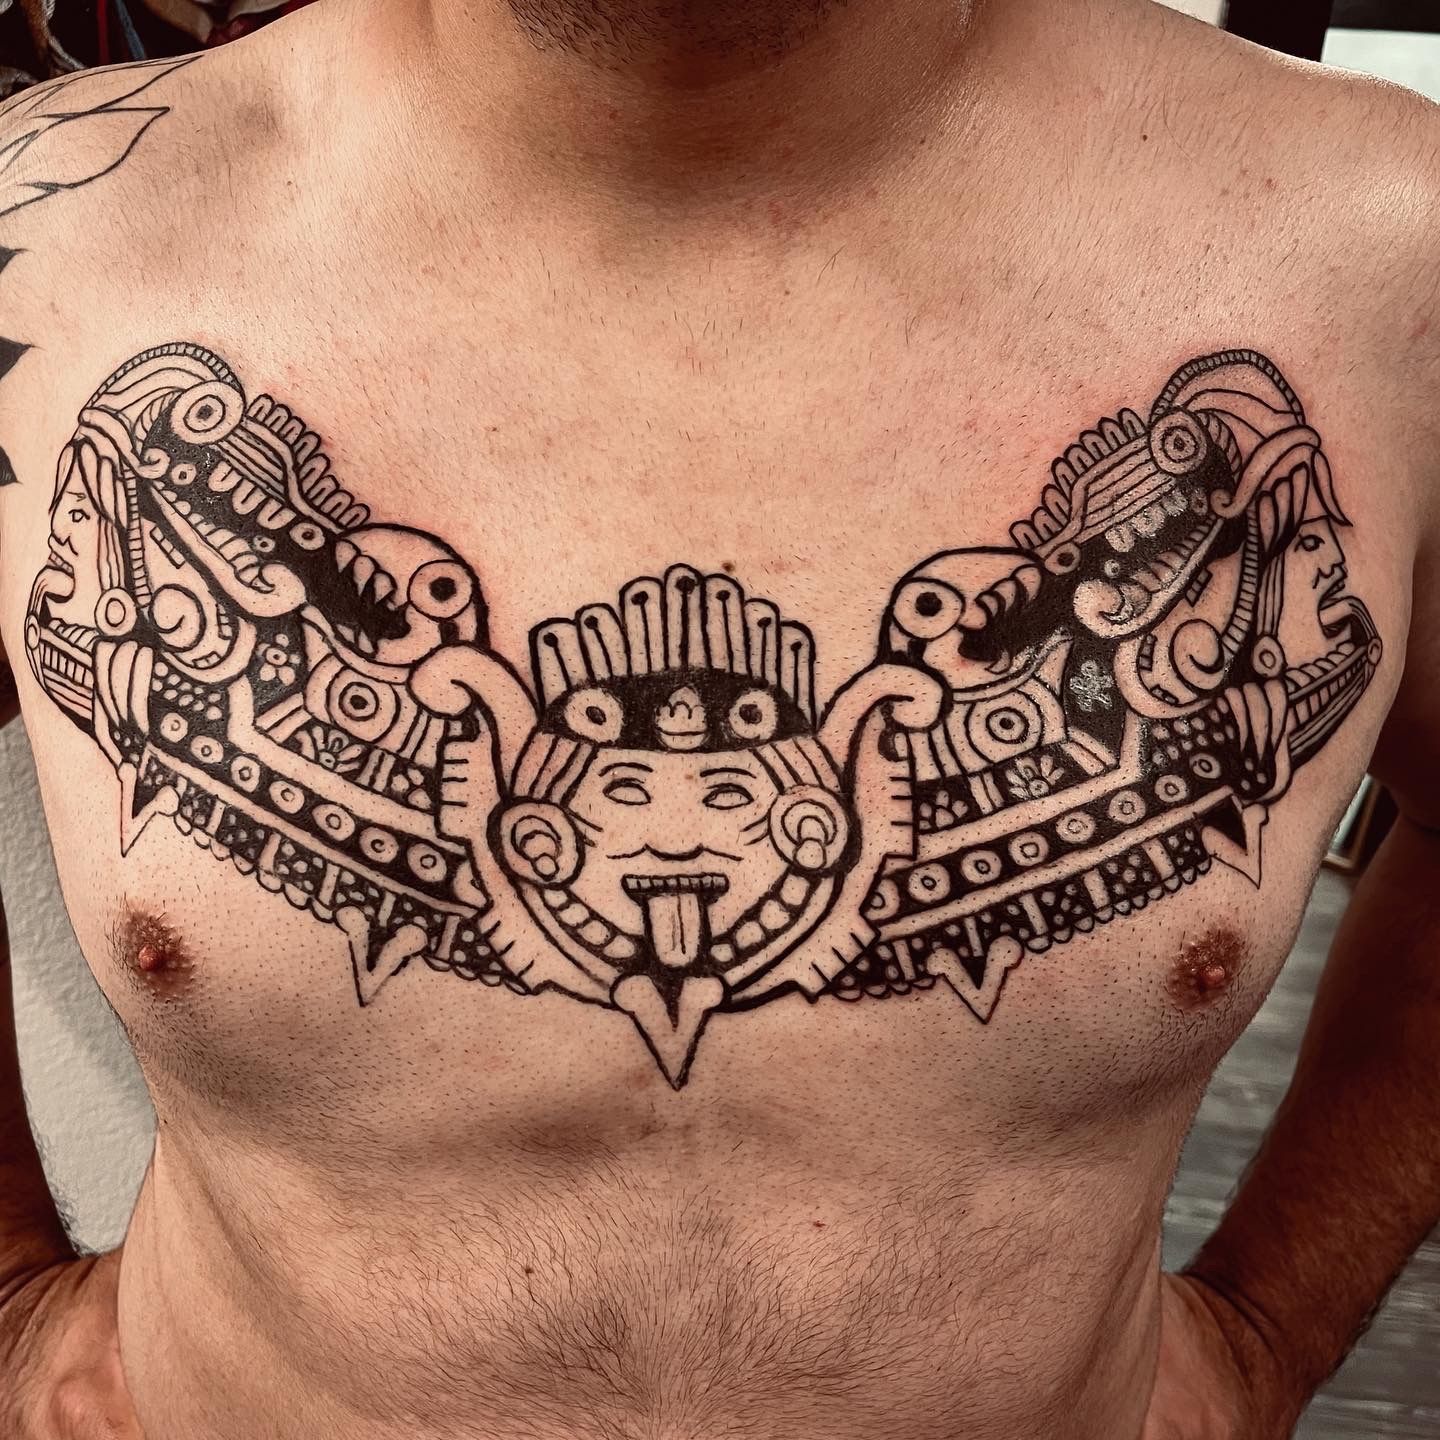 JRH Tattoos  Finished this full chest piece Thanks Tony jrhtattoos tats  tattoos ink aztec blackandgrey sessions largescale comittment socal  anaheim orangecounty shops  Facebook